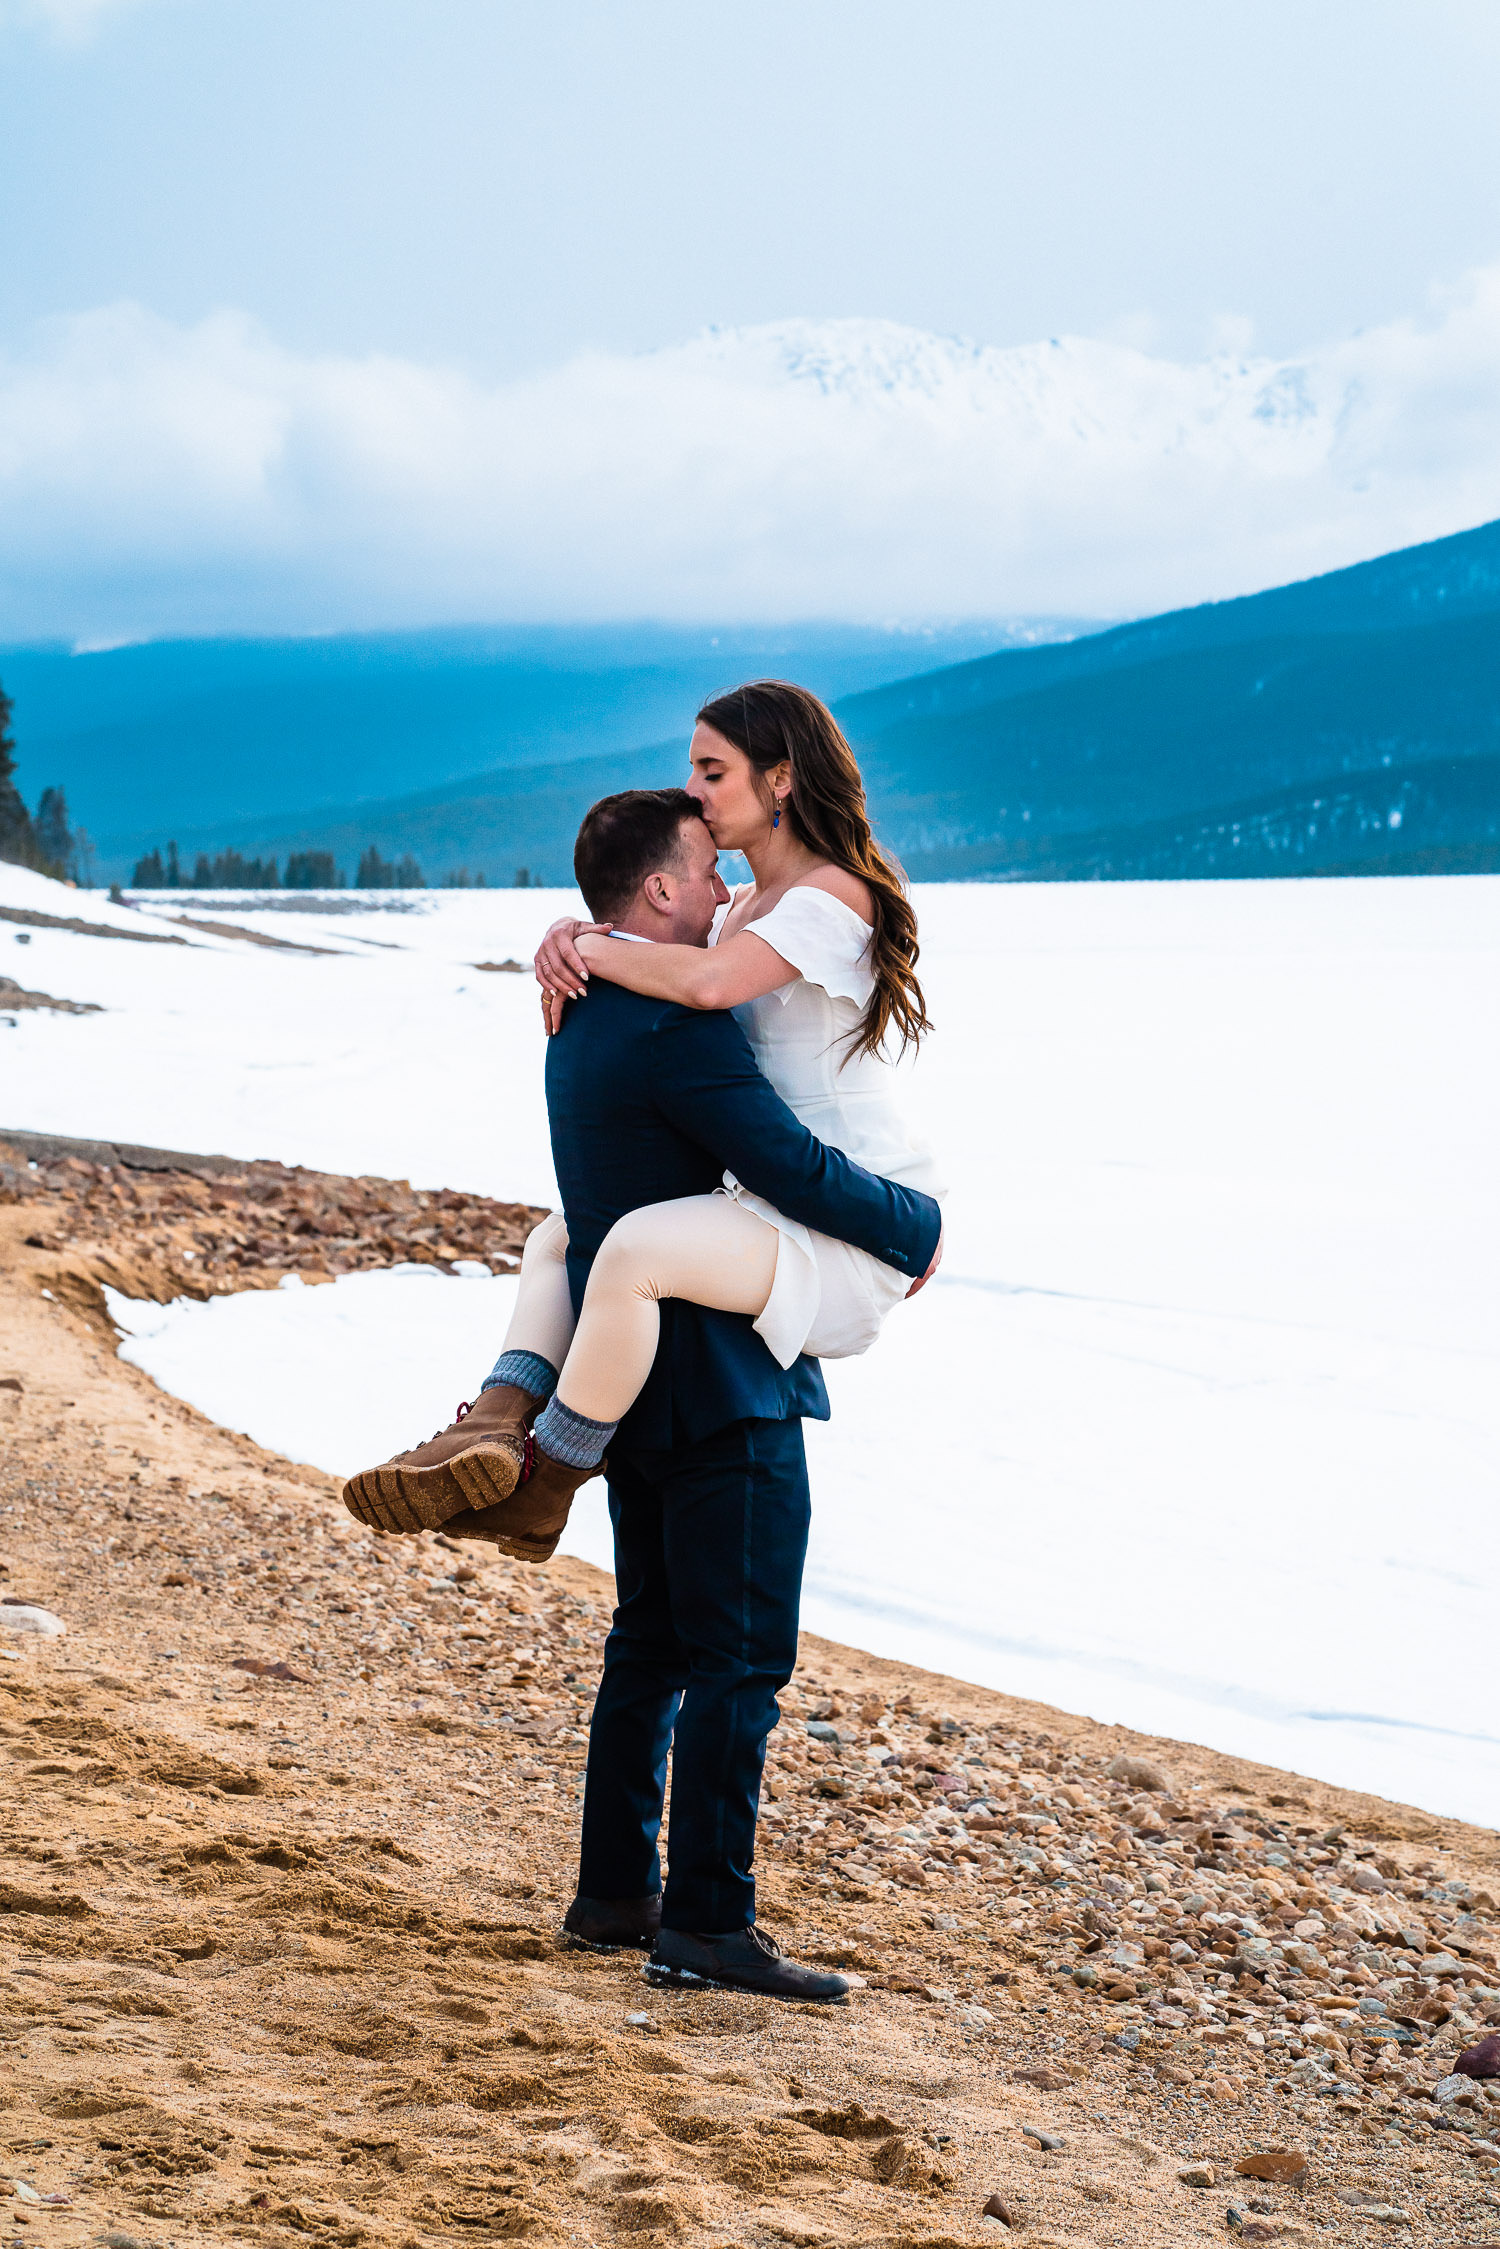 newlyweds embrace during their Colorado winter elopement